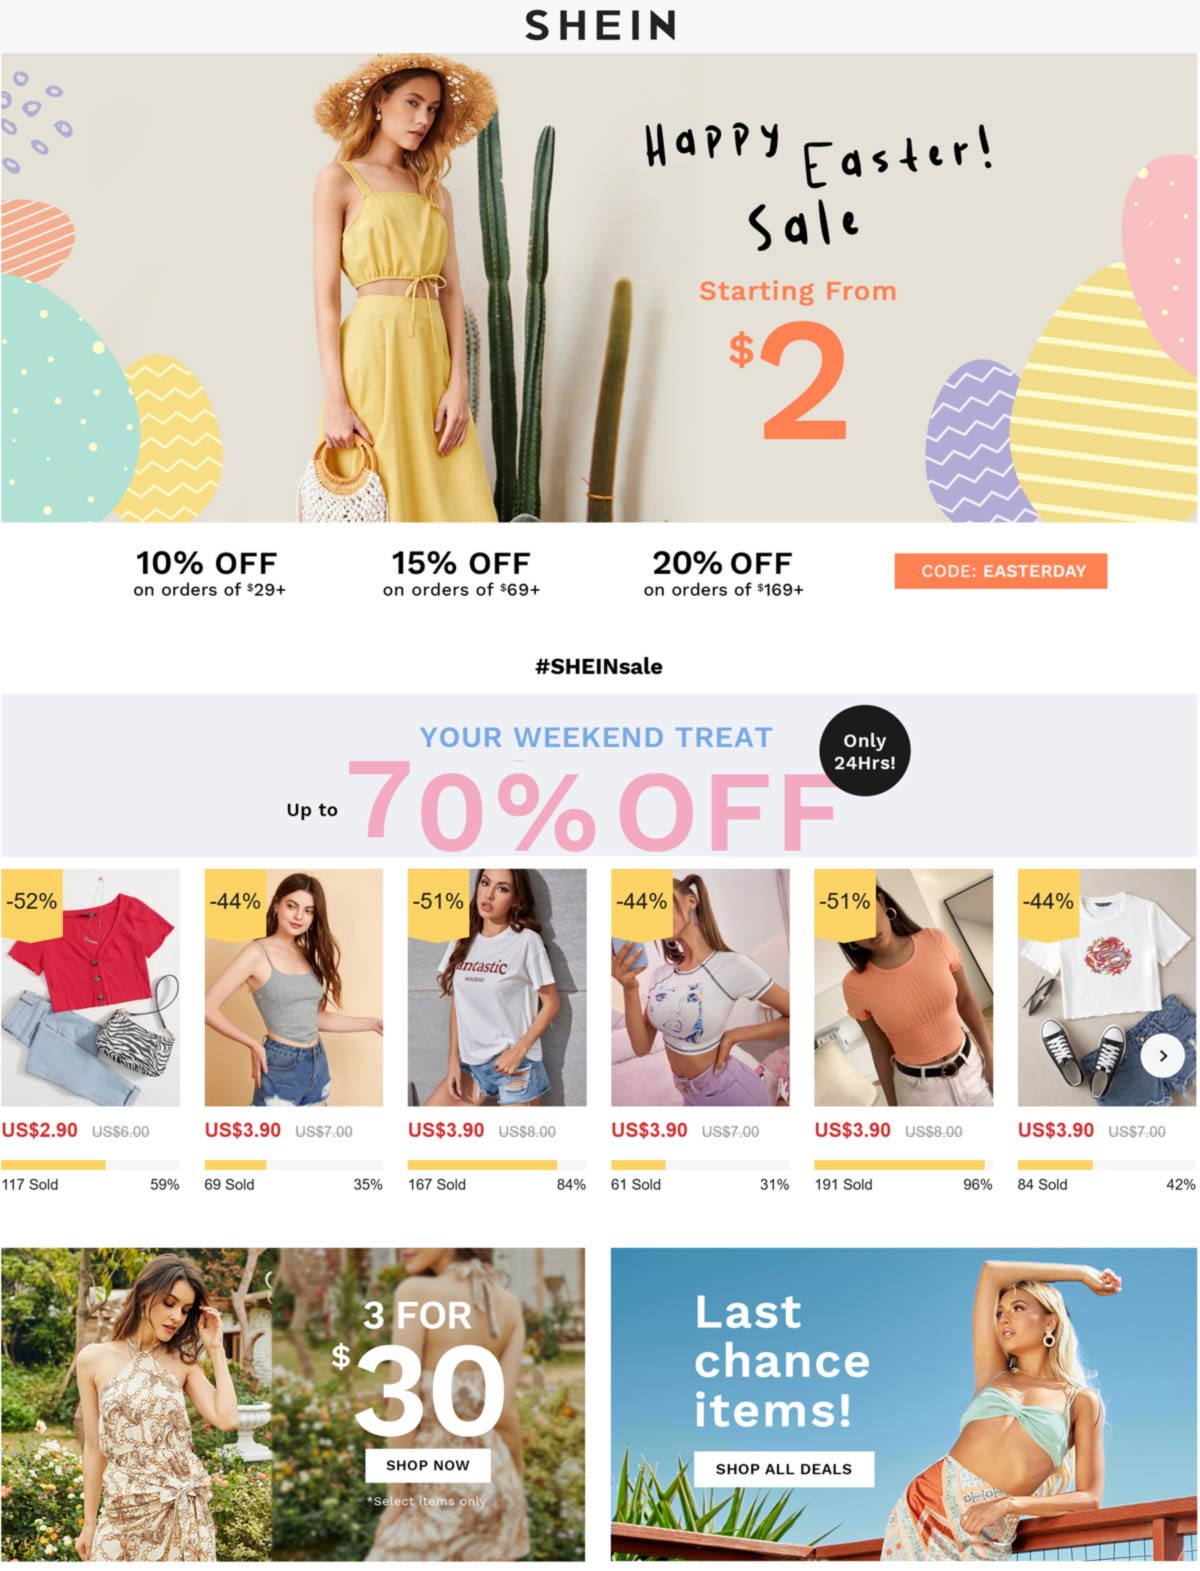 1020 off at SHEIN via promo code EASTERDAY shein The Coupons App®